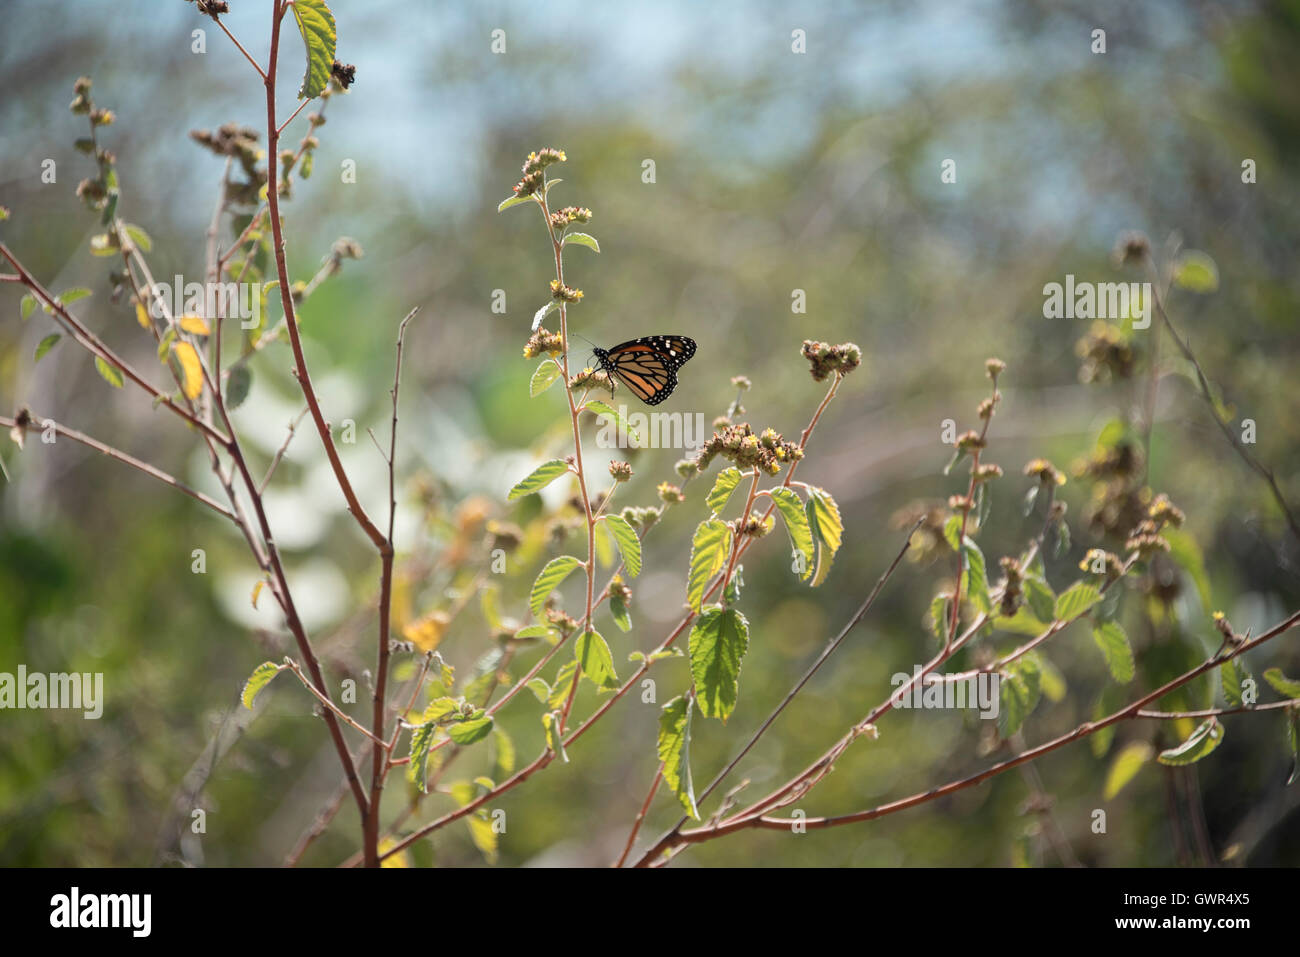 Southwest Puerto Rico, Cabo Rojo NW Refuge, Butterfly Stock Photo